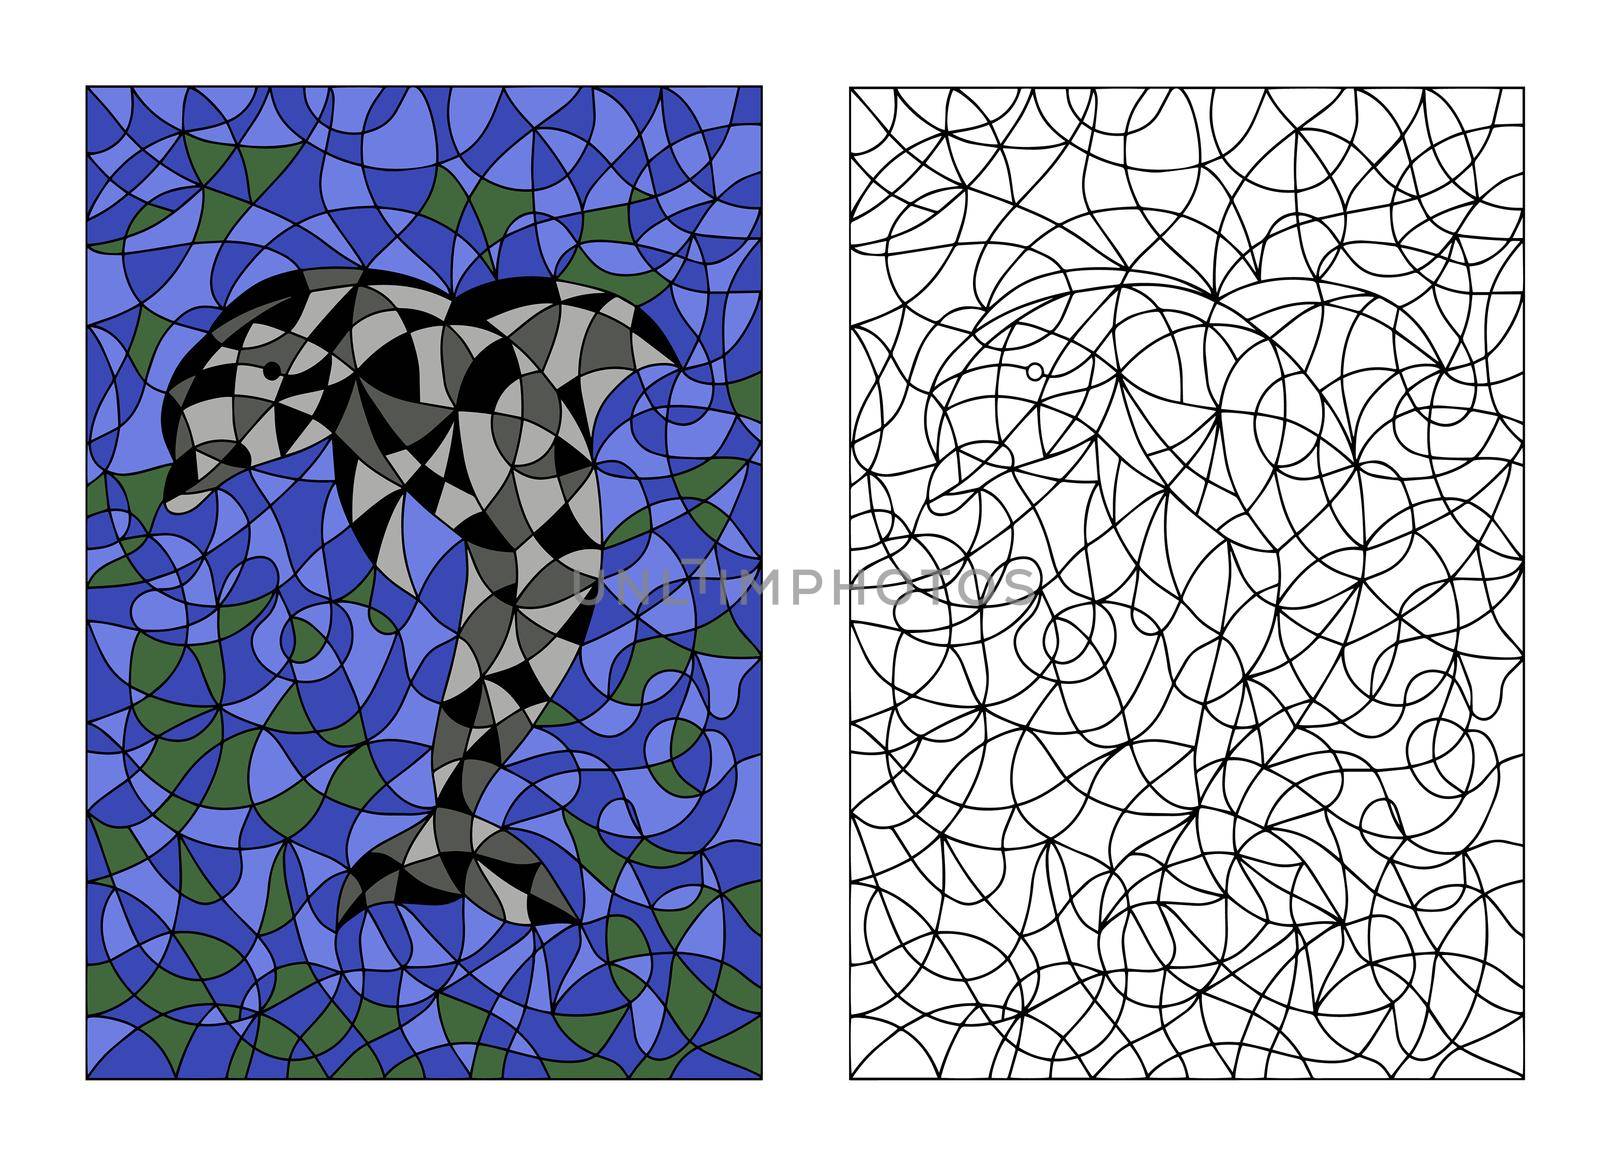 Black and White and Colored Illustration in stained glass style with abstract Dolphin. Image for Coloring Book, Coloring Page, Print, Batik and Window.